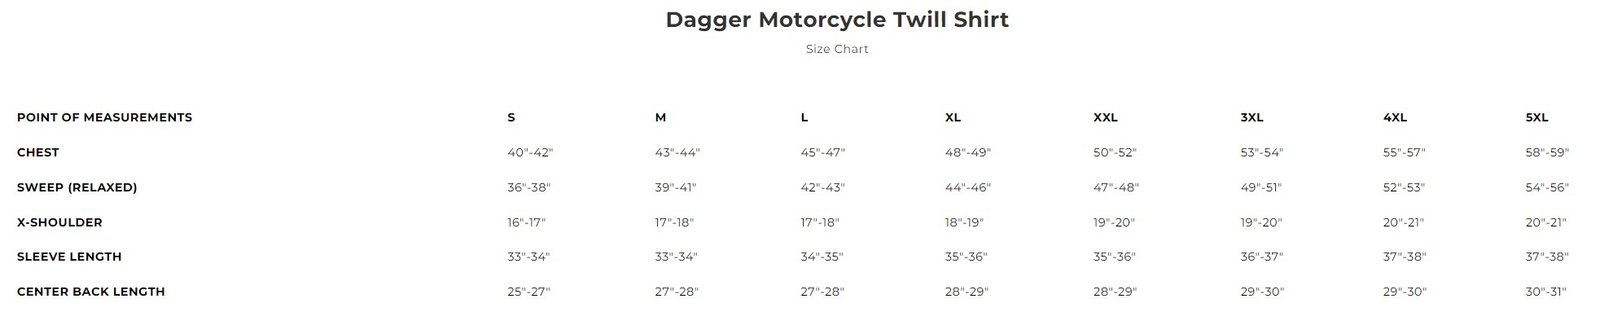 Size chart for men's twill motorcycle shirt.